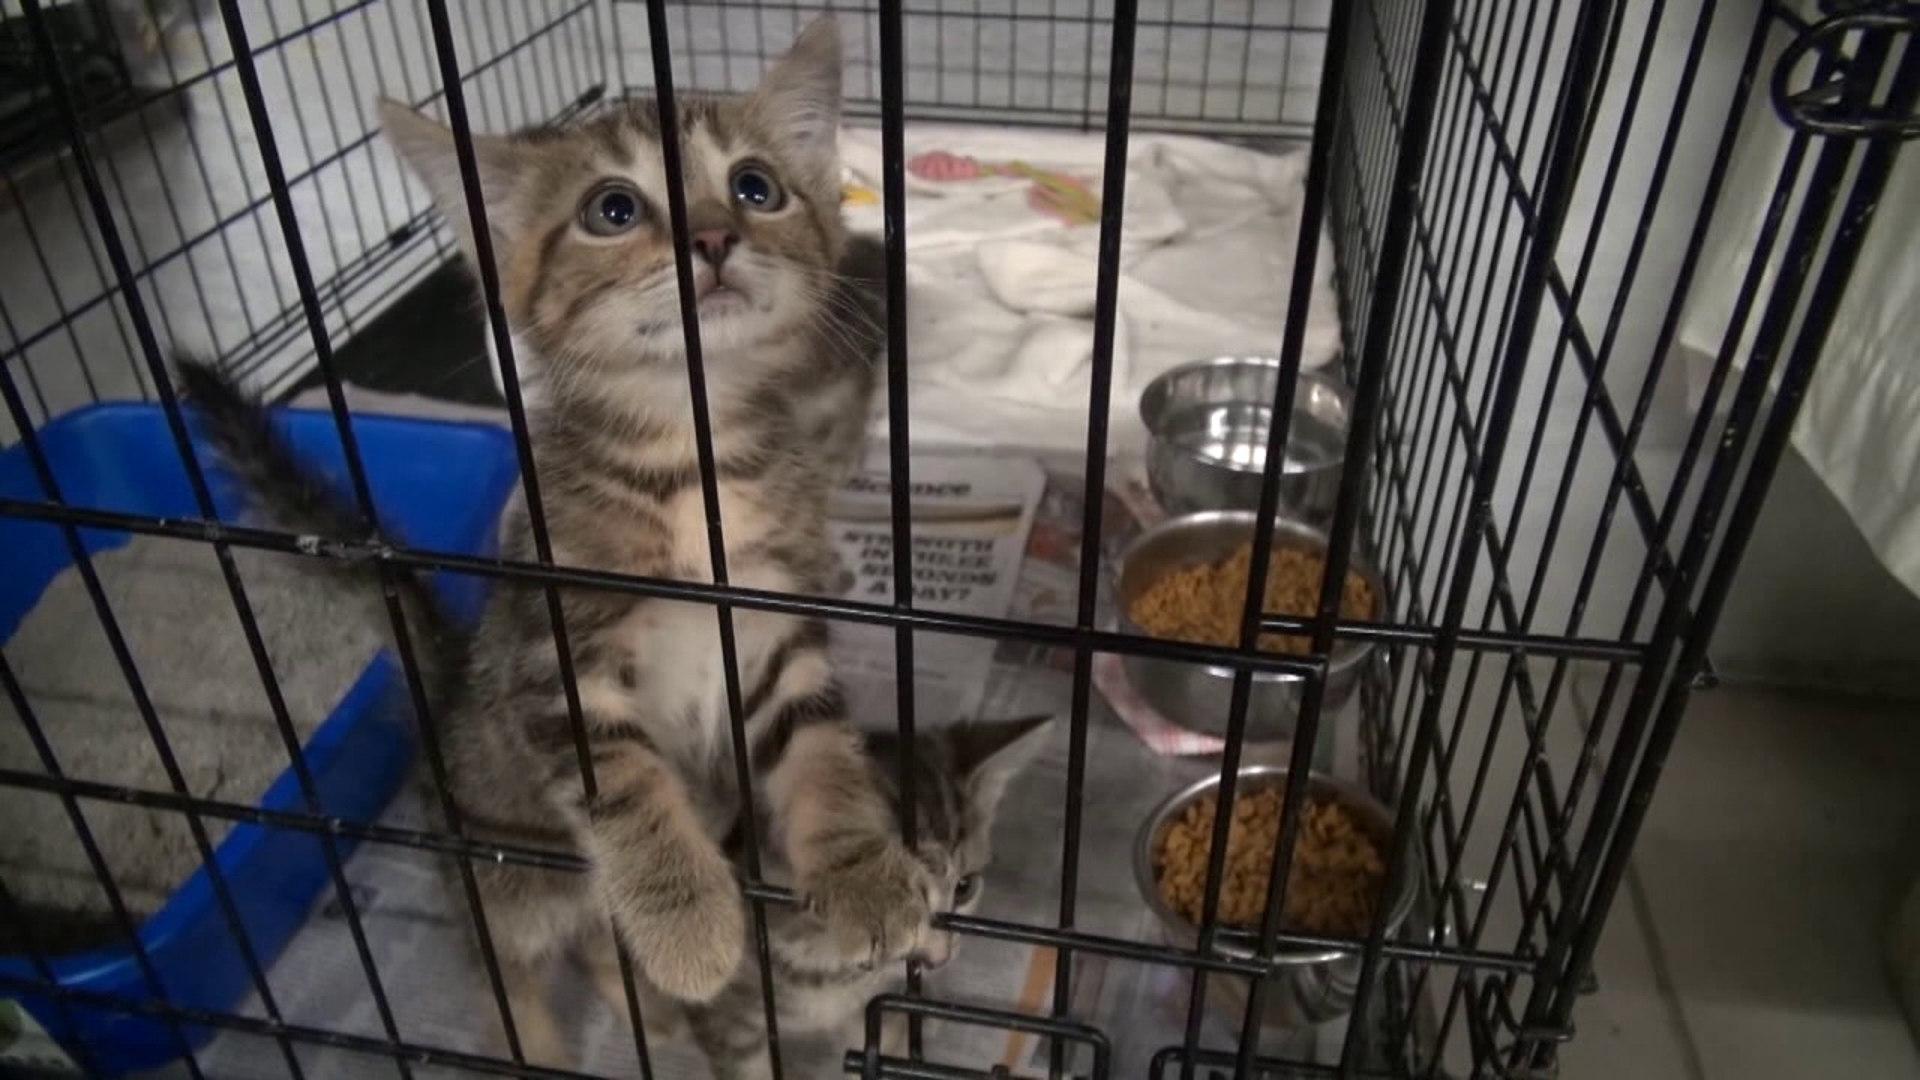 Eastern PA Animal Alliance fixes thousands of stray and feral cats each year but if employees can't hire a new vet, they will be forced to close in June.